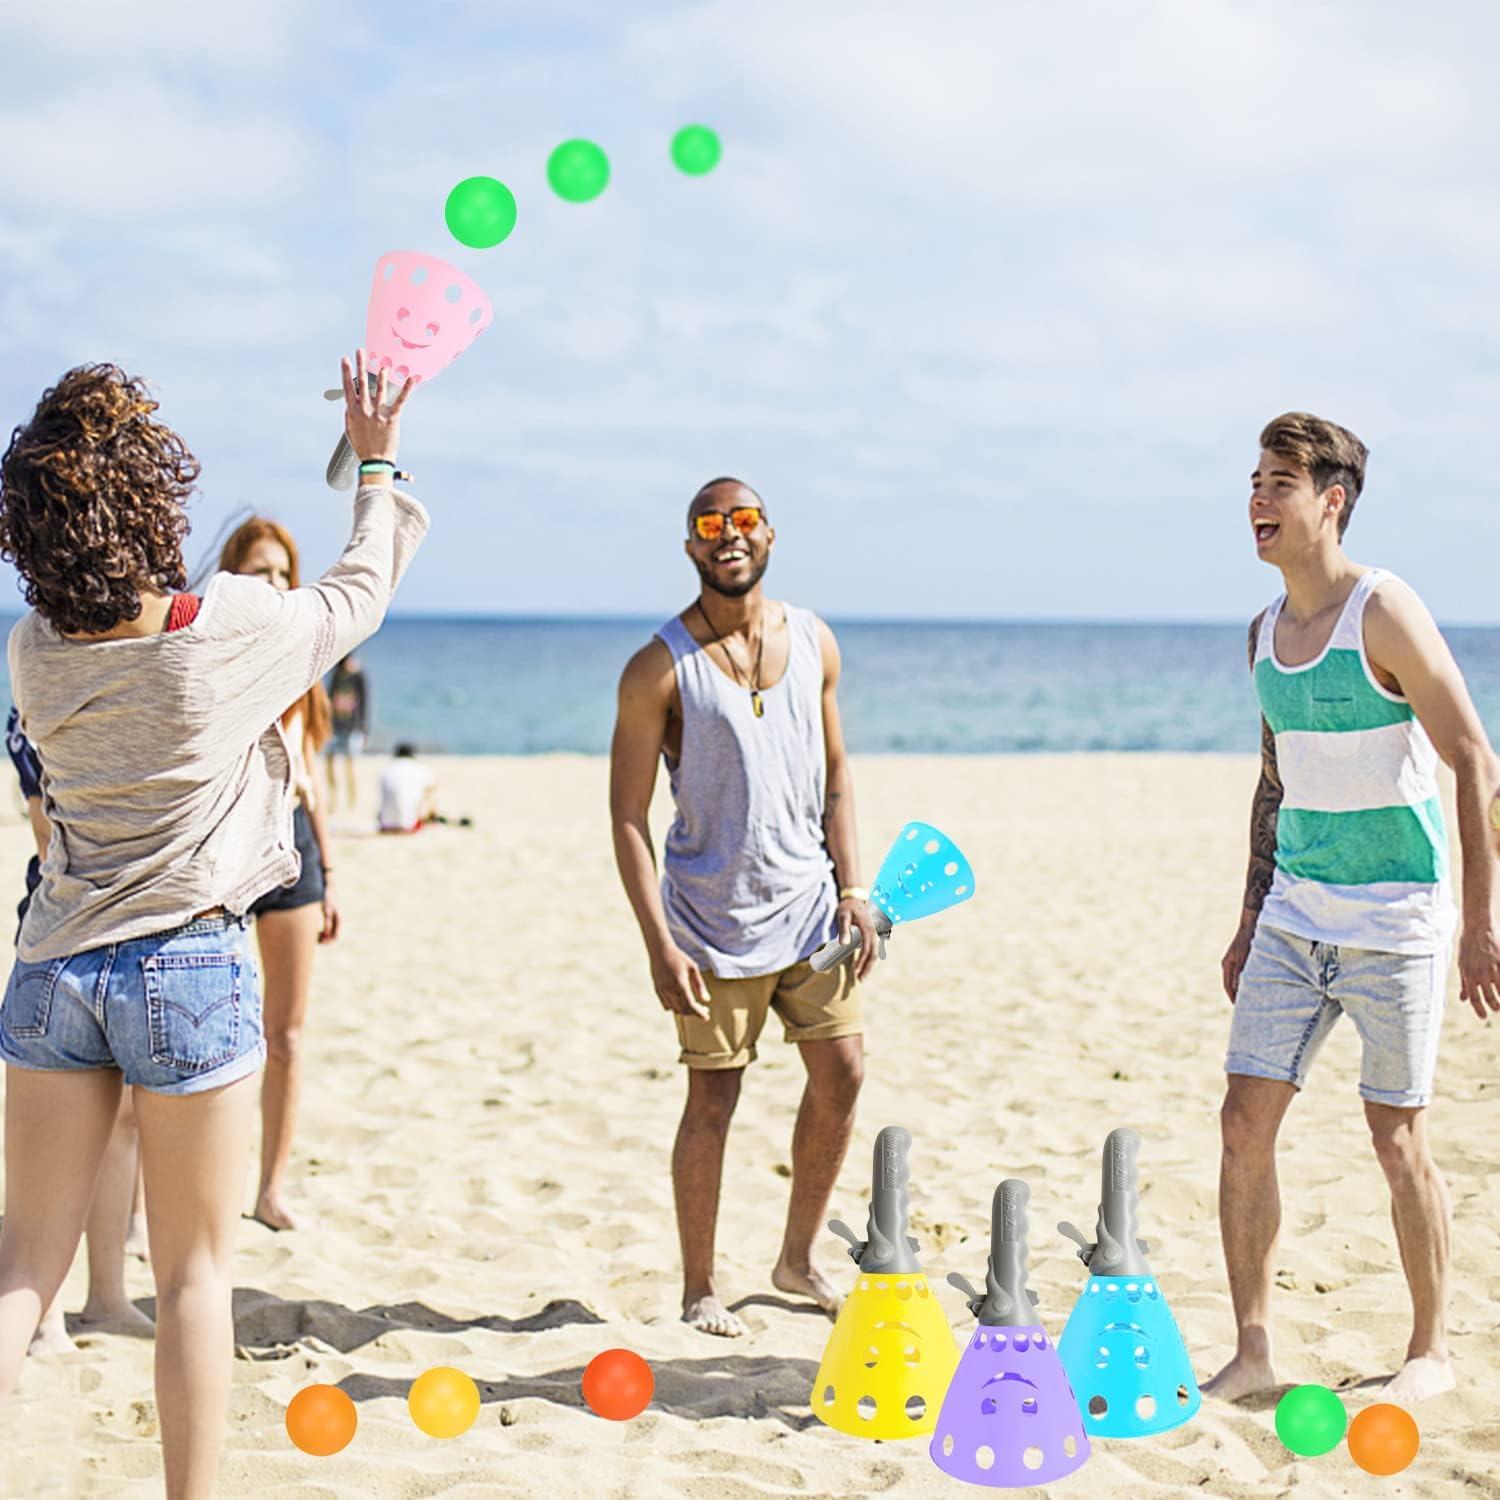 24 Pcs Pop-Pass-Catch Ball Game with 8 Catch Launcher Baskets and 16 Balls,Outdoor Indoor Game Activities for Kids 2023,Lawn Games Beach Sport Toys for Gift,Party Favor,Kids 4 5 6 7 8 9 10+and Adults